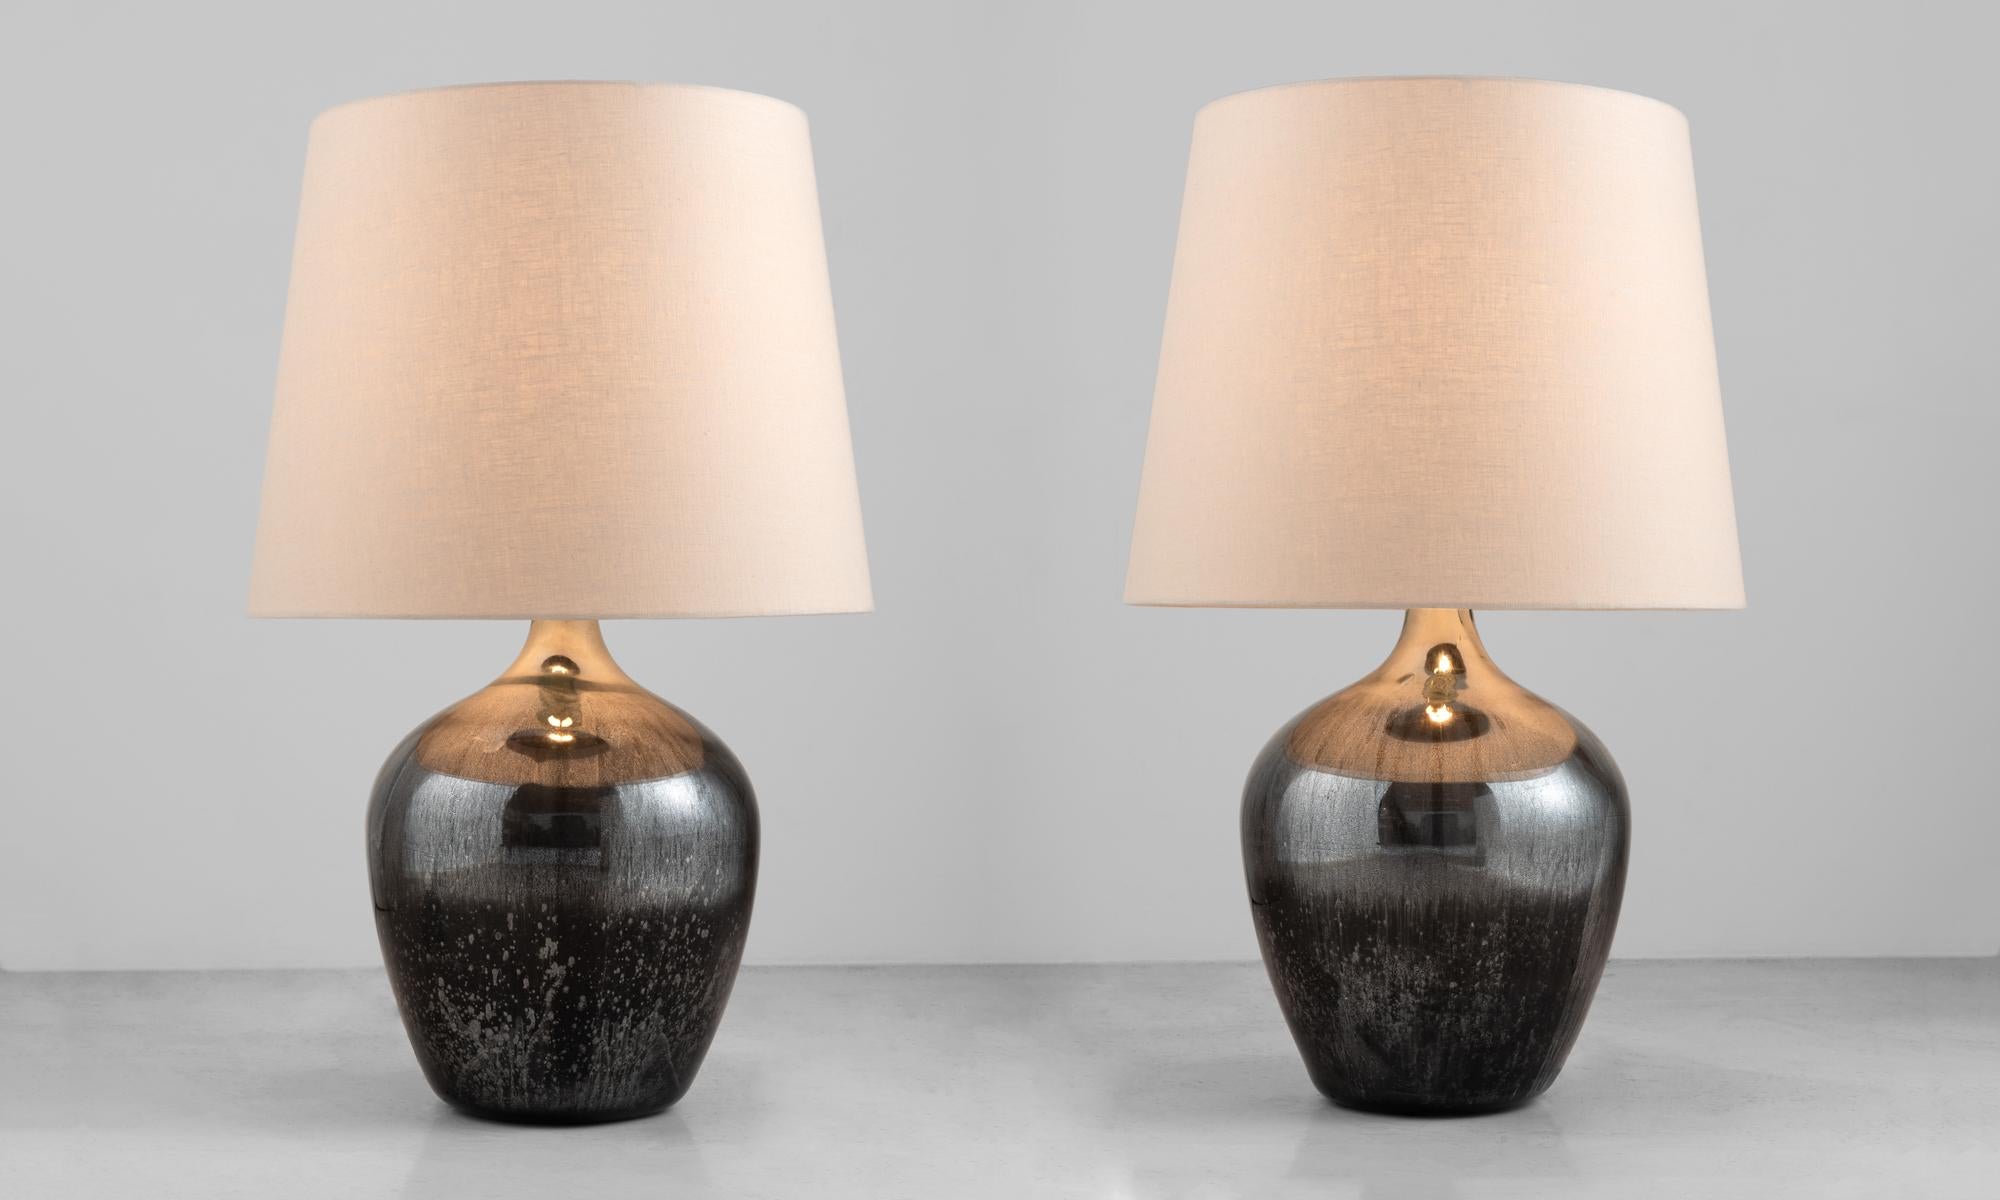 Mottled Mirrored Table Lamps, England circa 1940.

Originally used as a chemical storage bottle with incredible patina and surface. New linen shade.

20